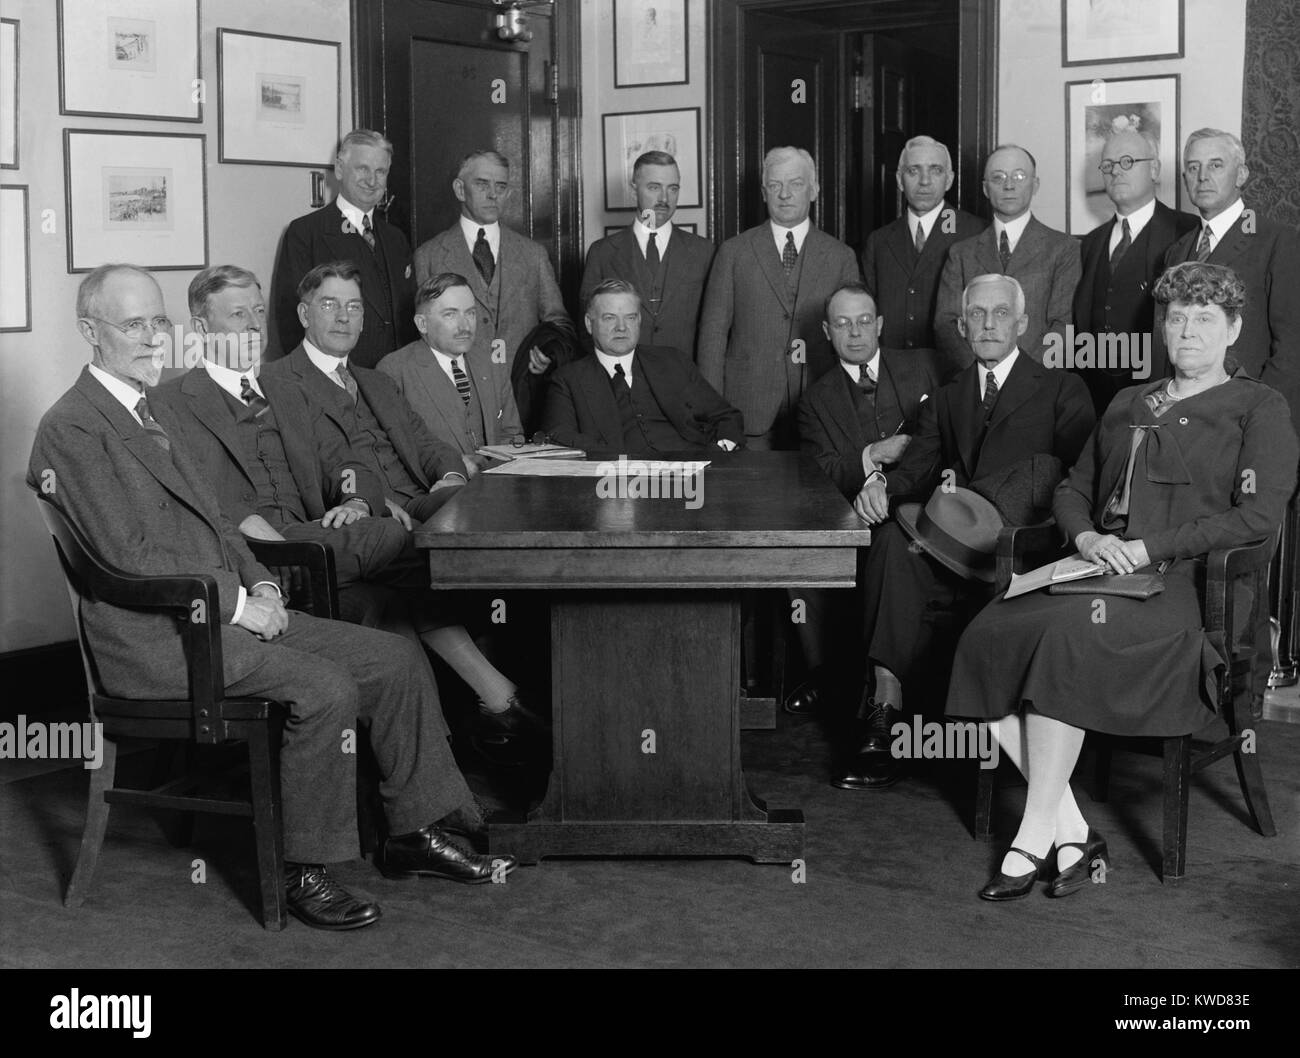 Herbert Hoover headed the Flood Commission to assist the Red Cross in the relief effort in 1927. Members included the Secretaries of the Departments of the Treasury, War, and Navy, and the members of the Red Cross Central Committee. (BSLOC 2015 16 68) Stock Photo